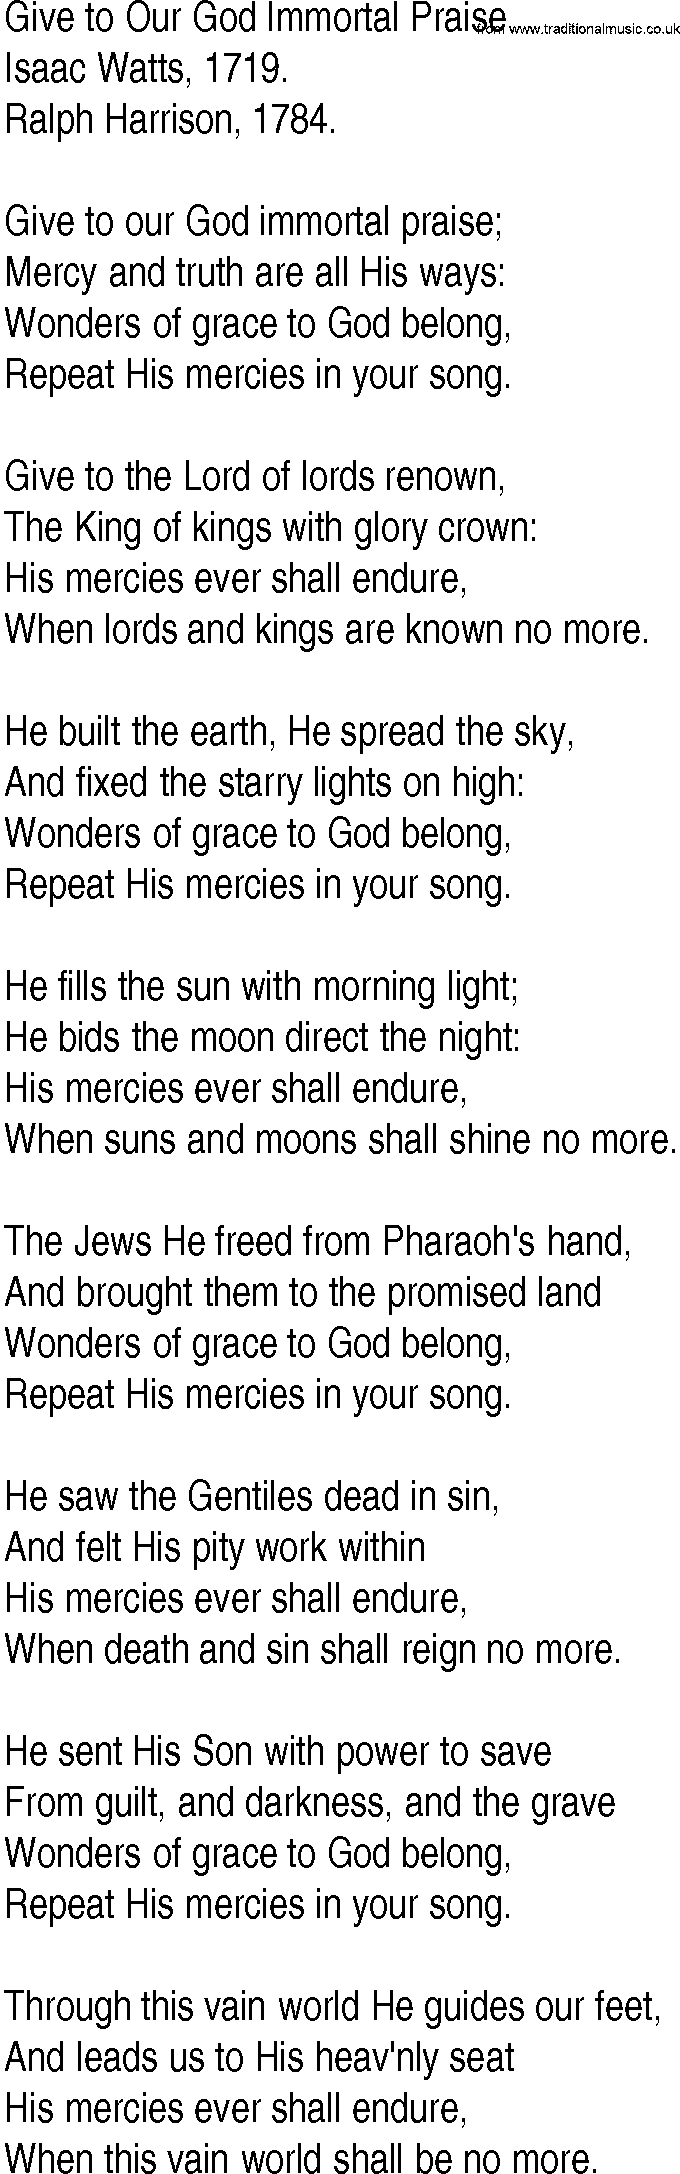 Hymn and Gospel Song: Give to Our God Immortal Praise by Isaac Watts lyrics